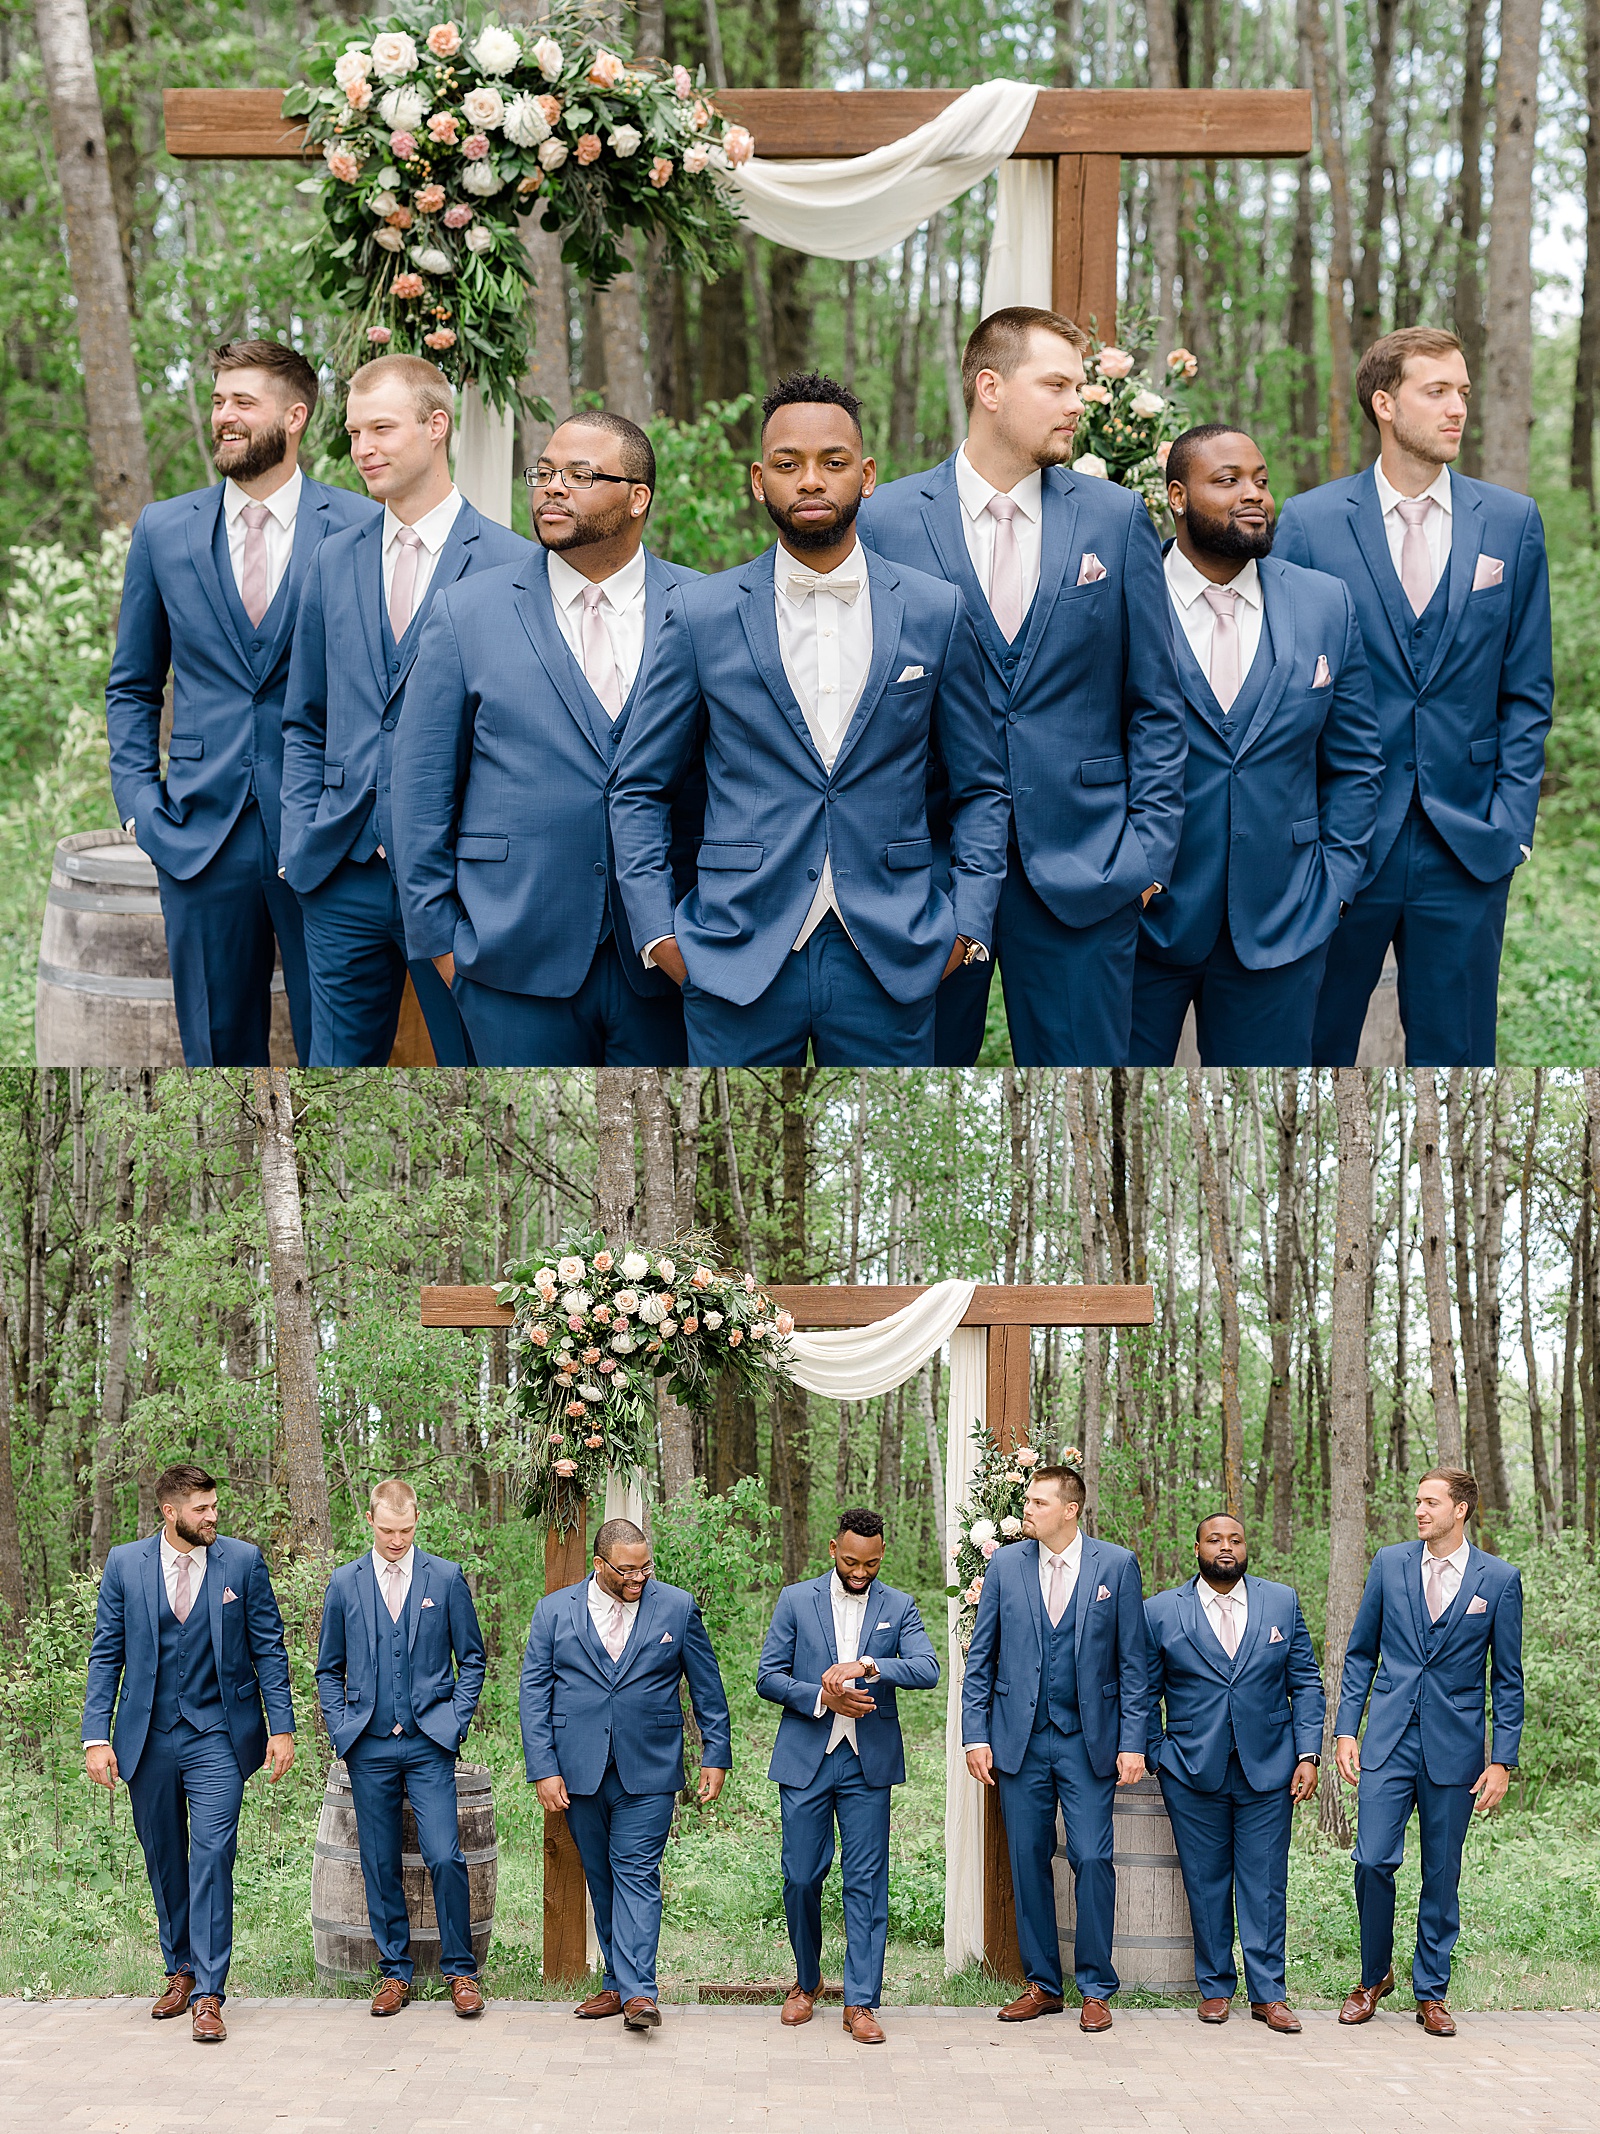 Groom with his groomsmen in navy suits at Bluebelle Events wedding 